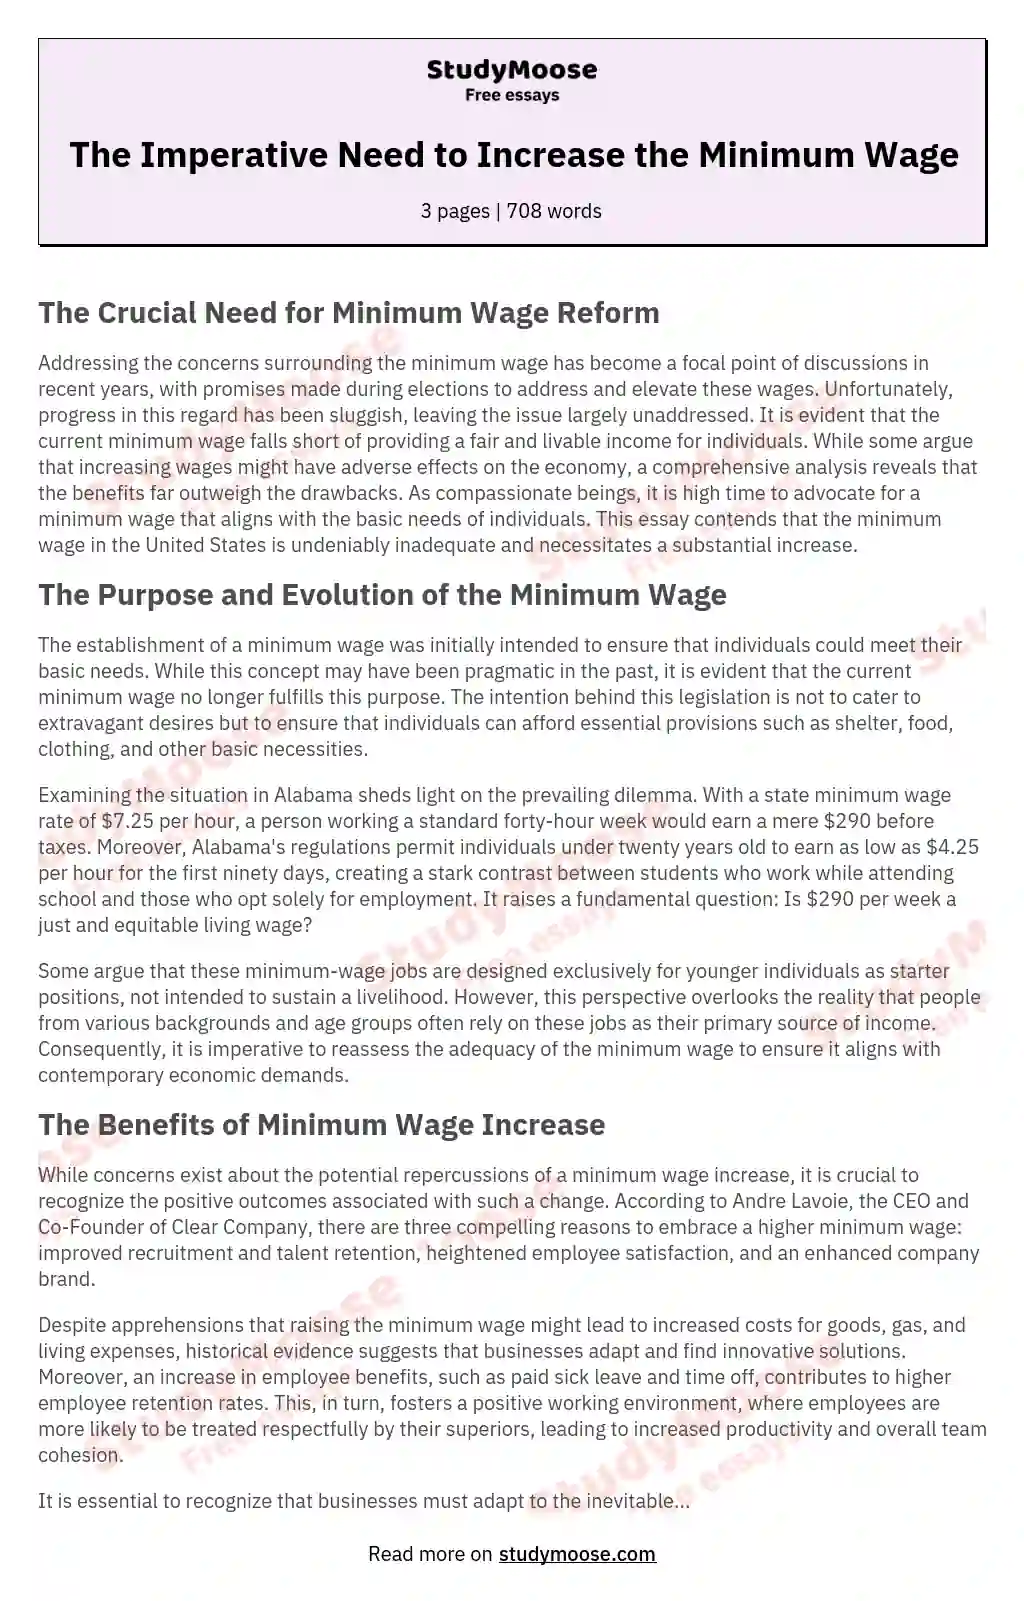 An Argument in Favor of Raising Minimum Wage in the United States